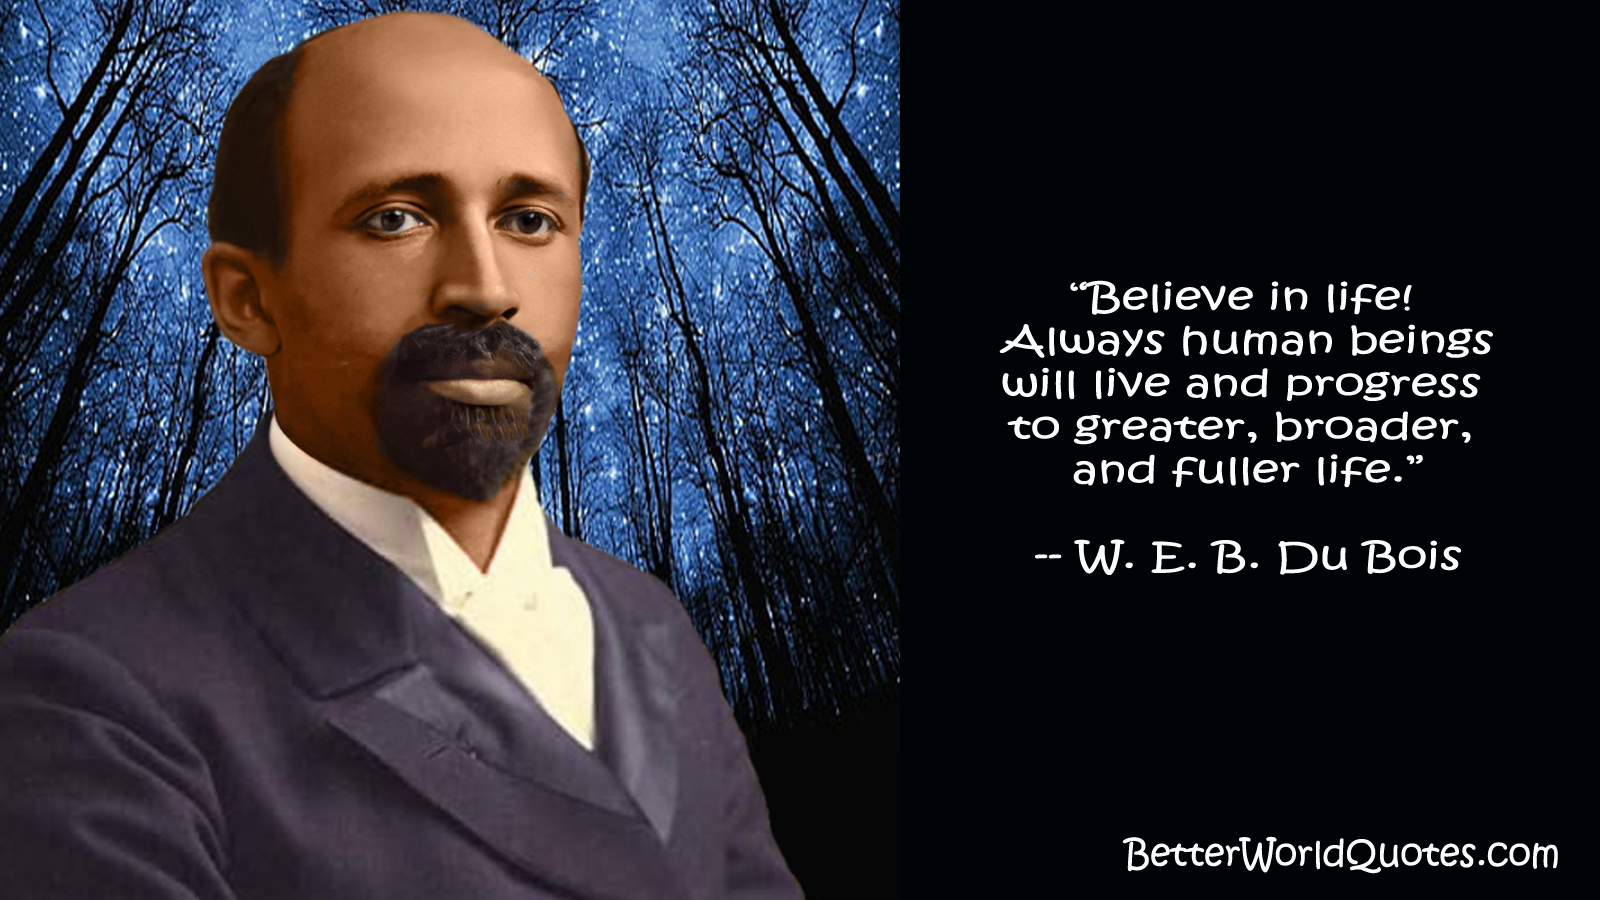 W. E. B. Du Bois: Believe in life! Always human beings will live and progress to greater, broader, and fuller life.